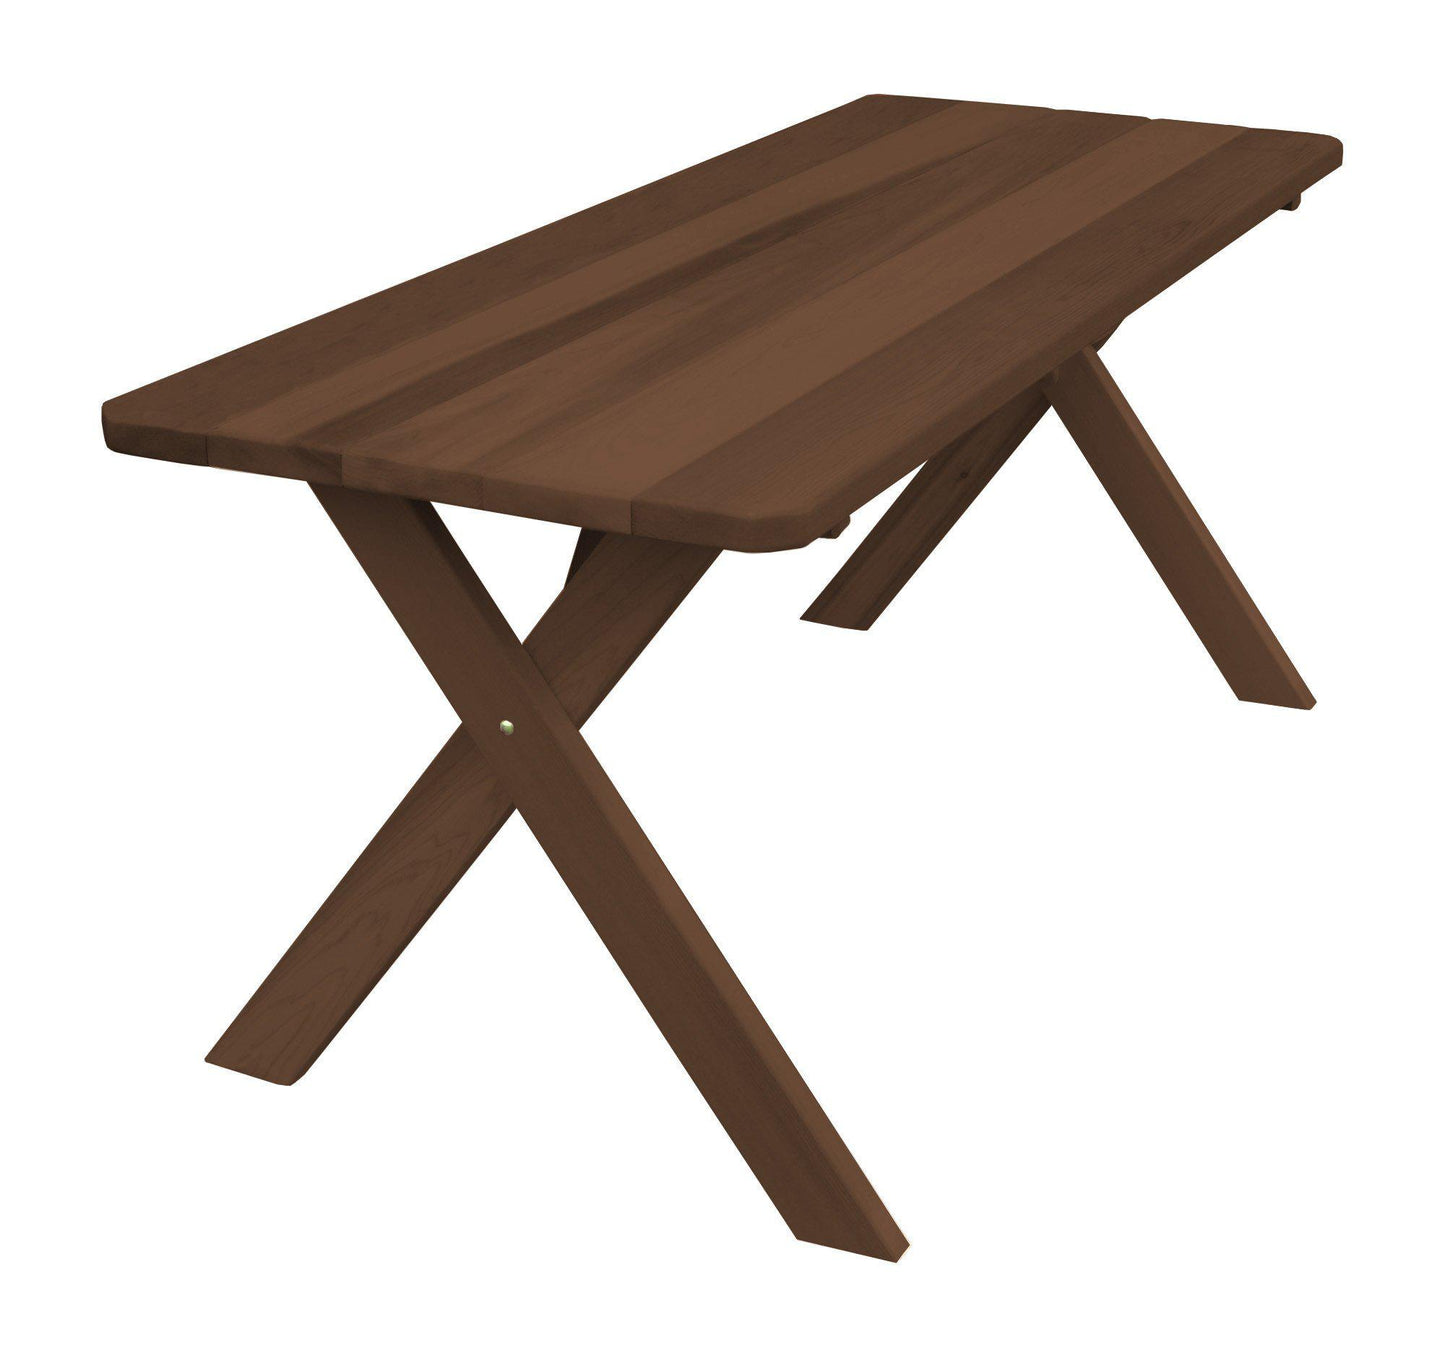 Regallion Outdoor Western Red Cedar 94" Cross-leg Table Only - LEAD TIME TO SHIP 2 WEEKS